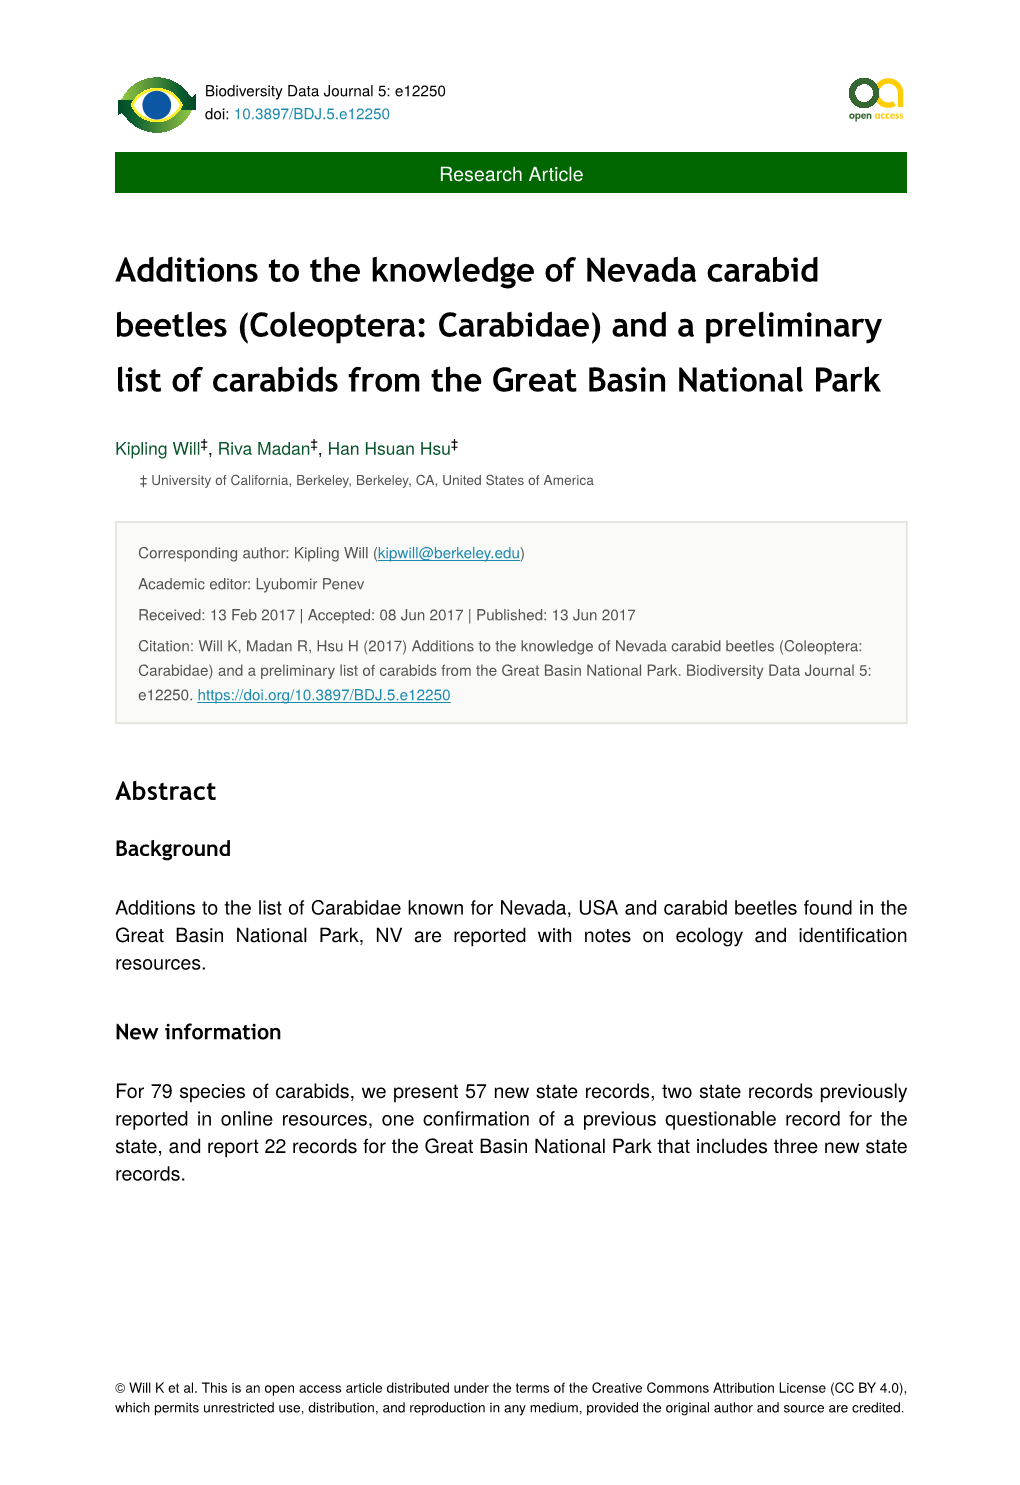 Additions to the Knowledge of Nevada Carabid Beetles (Coleoptera: Carabidae) and a Preliminary List of Carabids from the Great Basin National Park